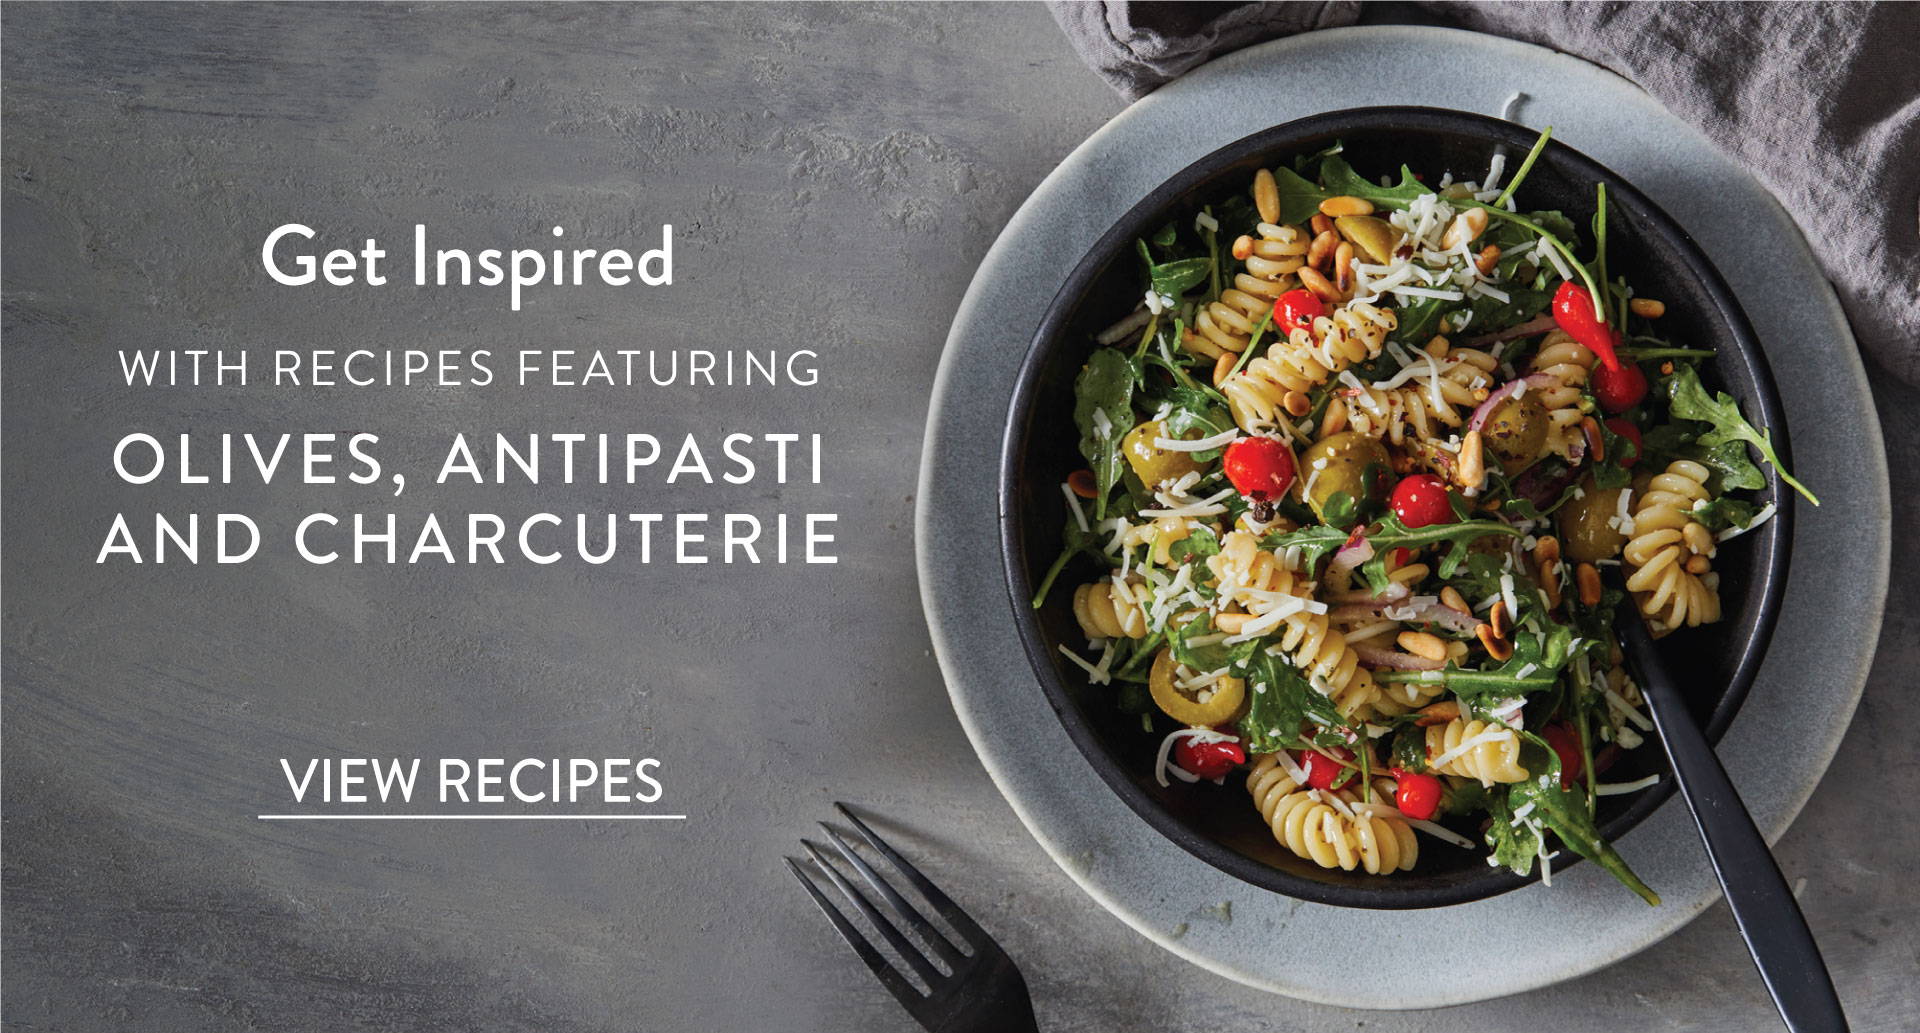 Fusilli pasta in a bowl mixed with olives, pepper drops and greens